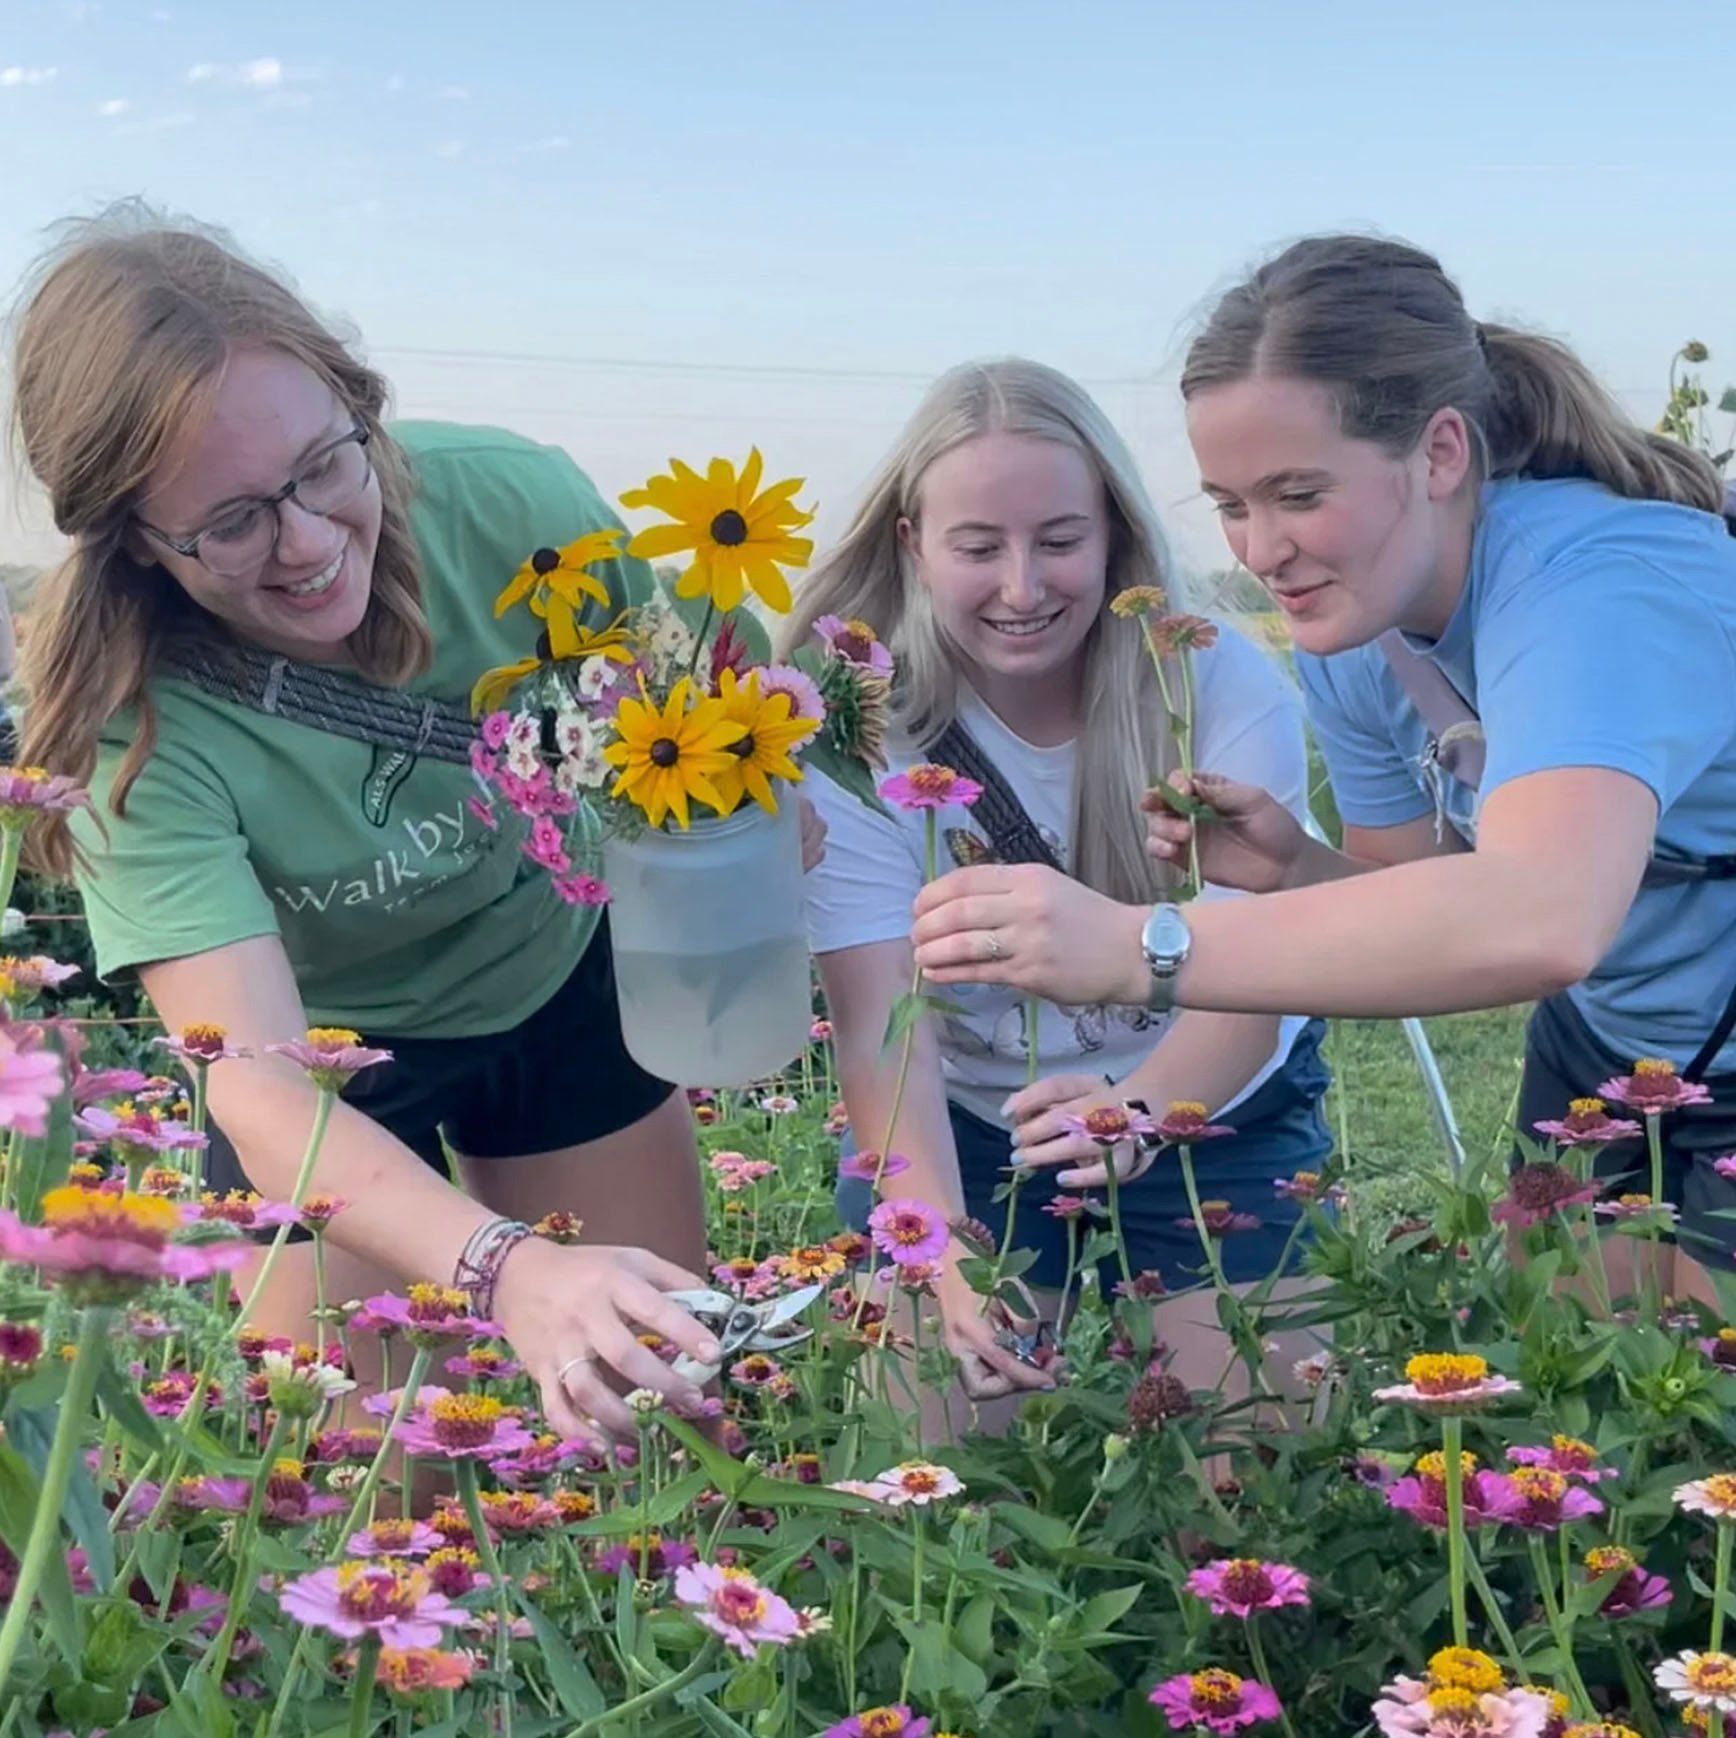 Three young adult females at a You-Pick event picking flowers for their container.